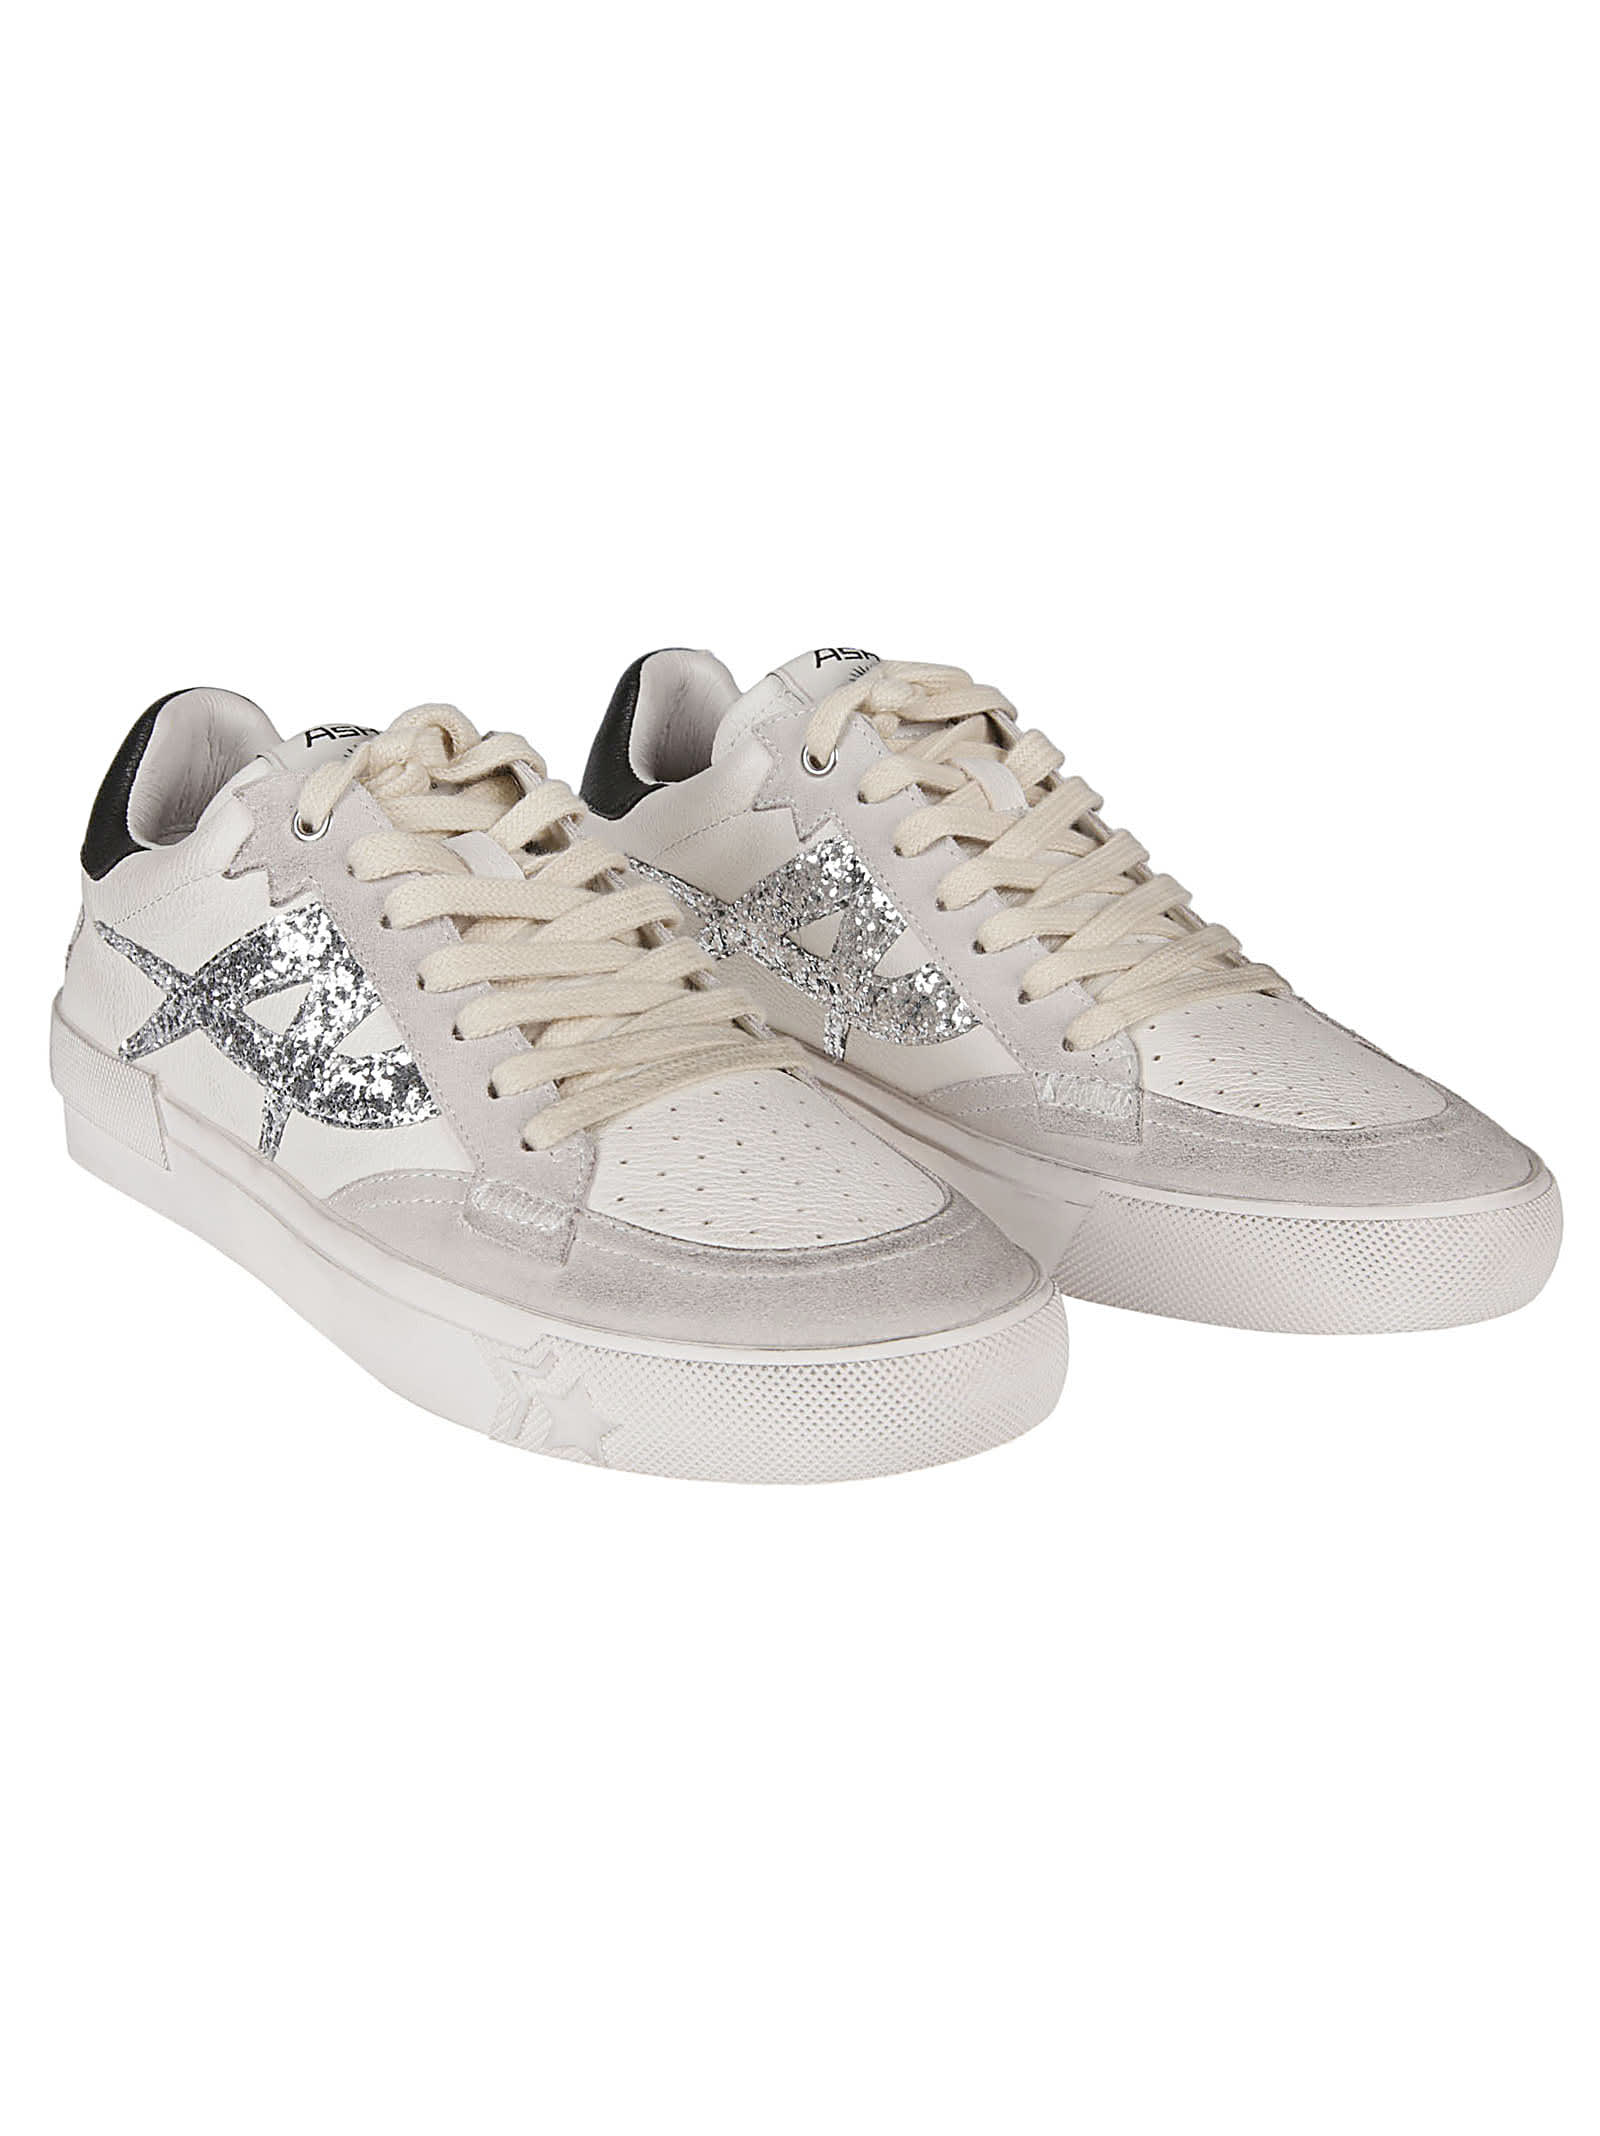 Shop Ash Moonlight Sneakers In White/silver/black